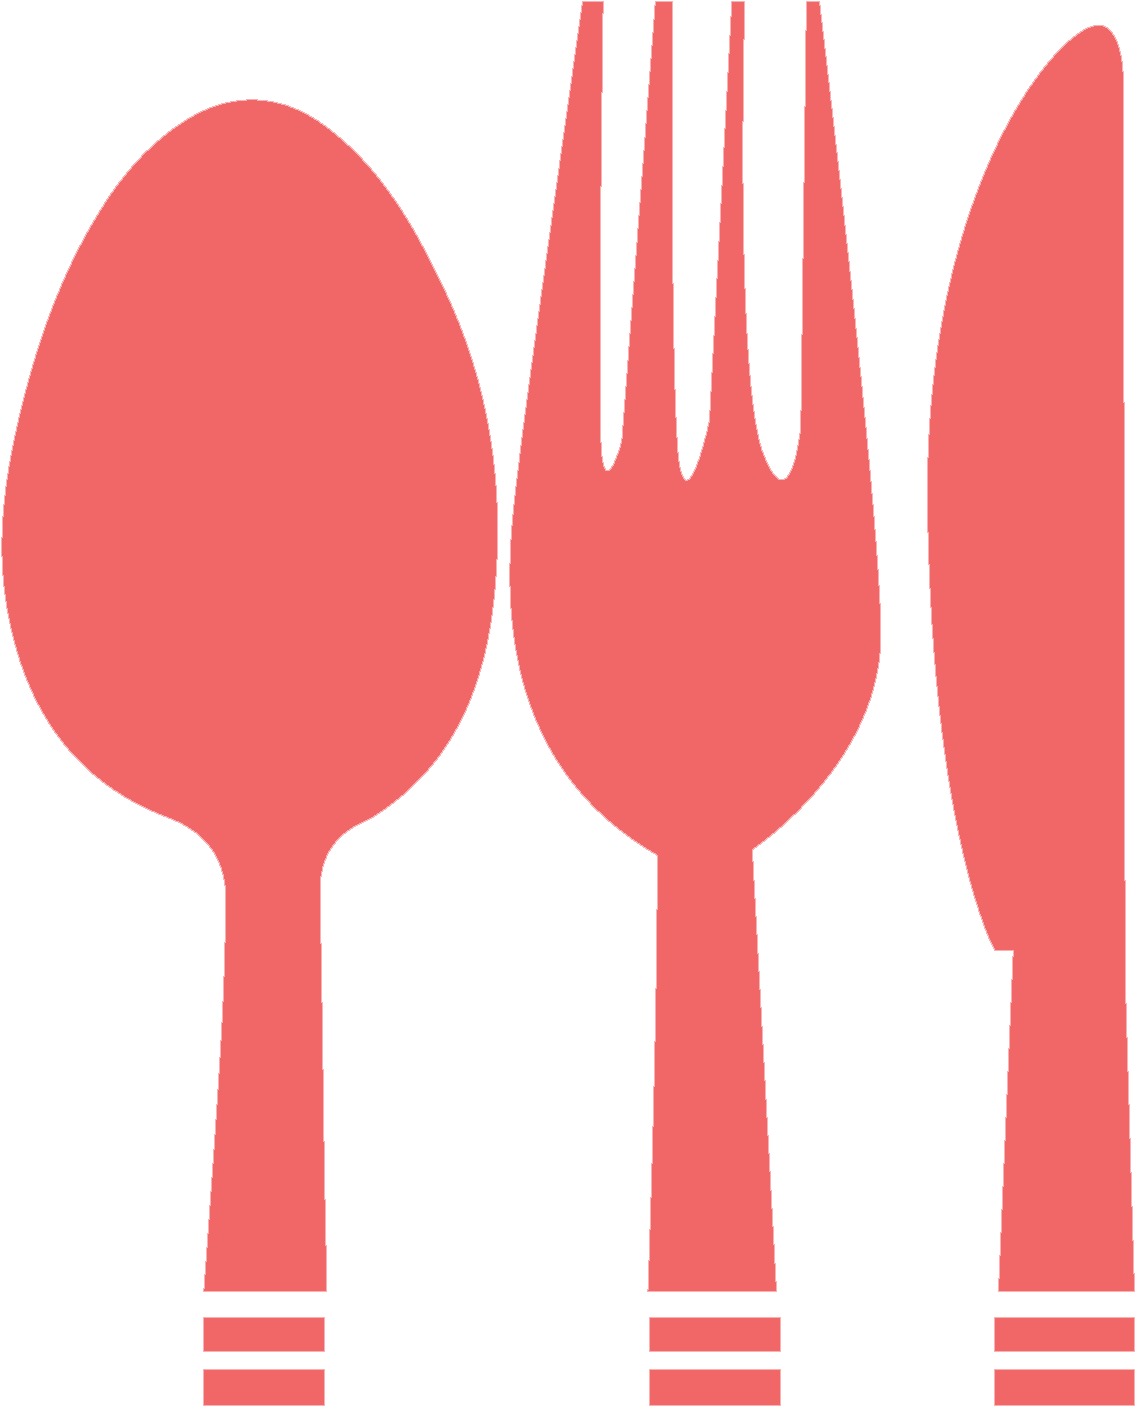 A Spoon Fork And Knife